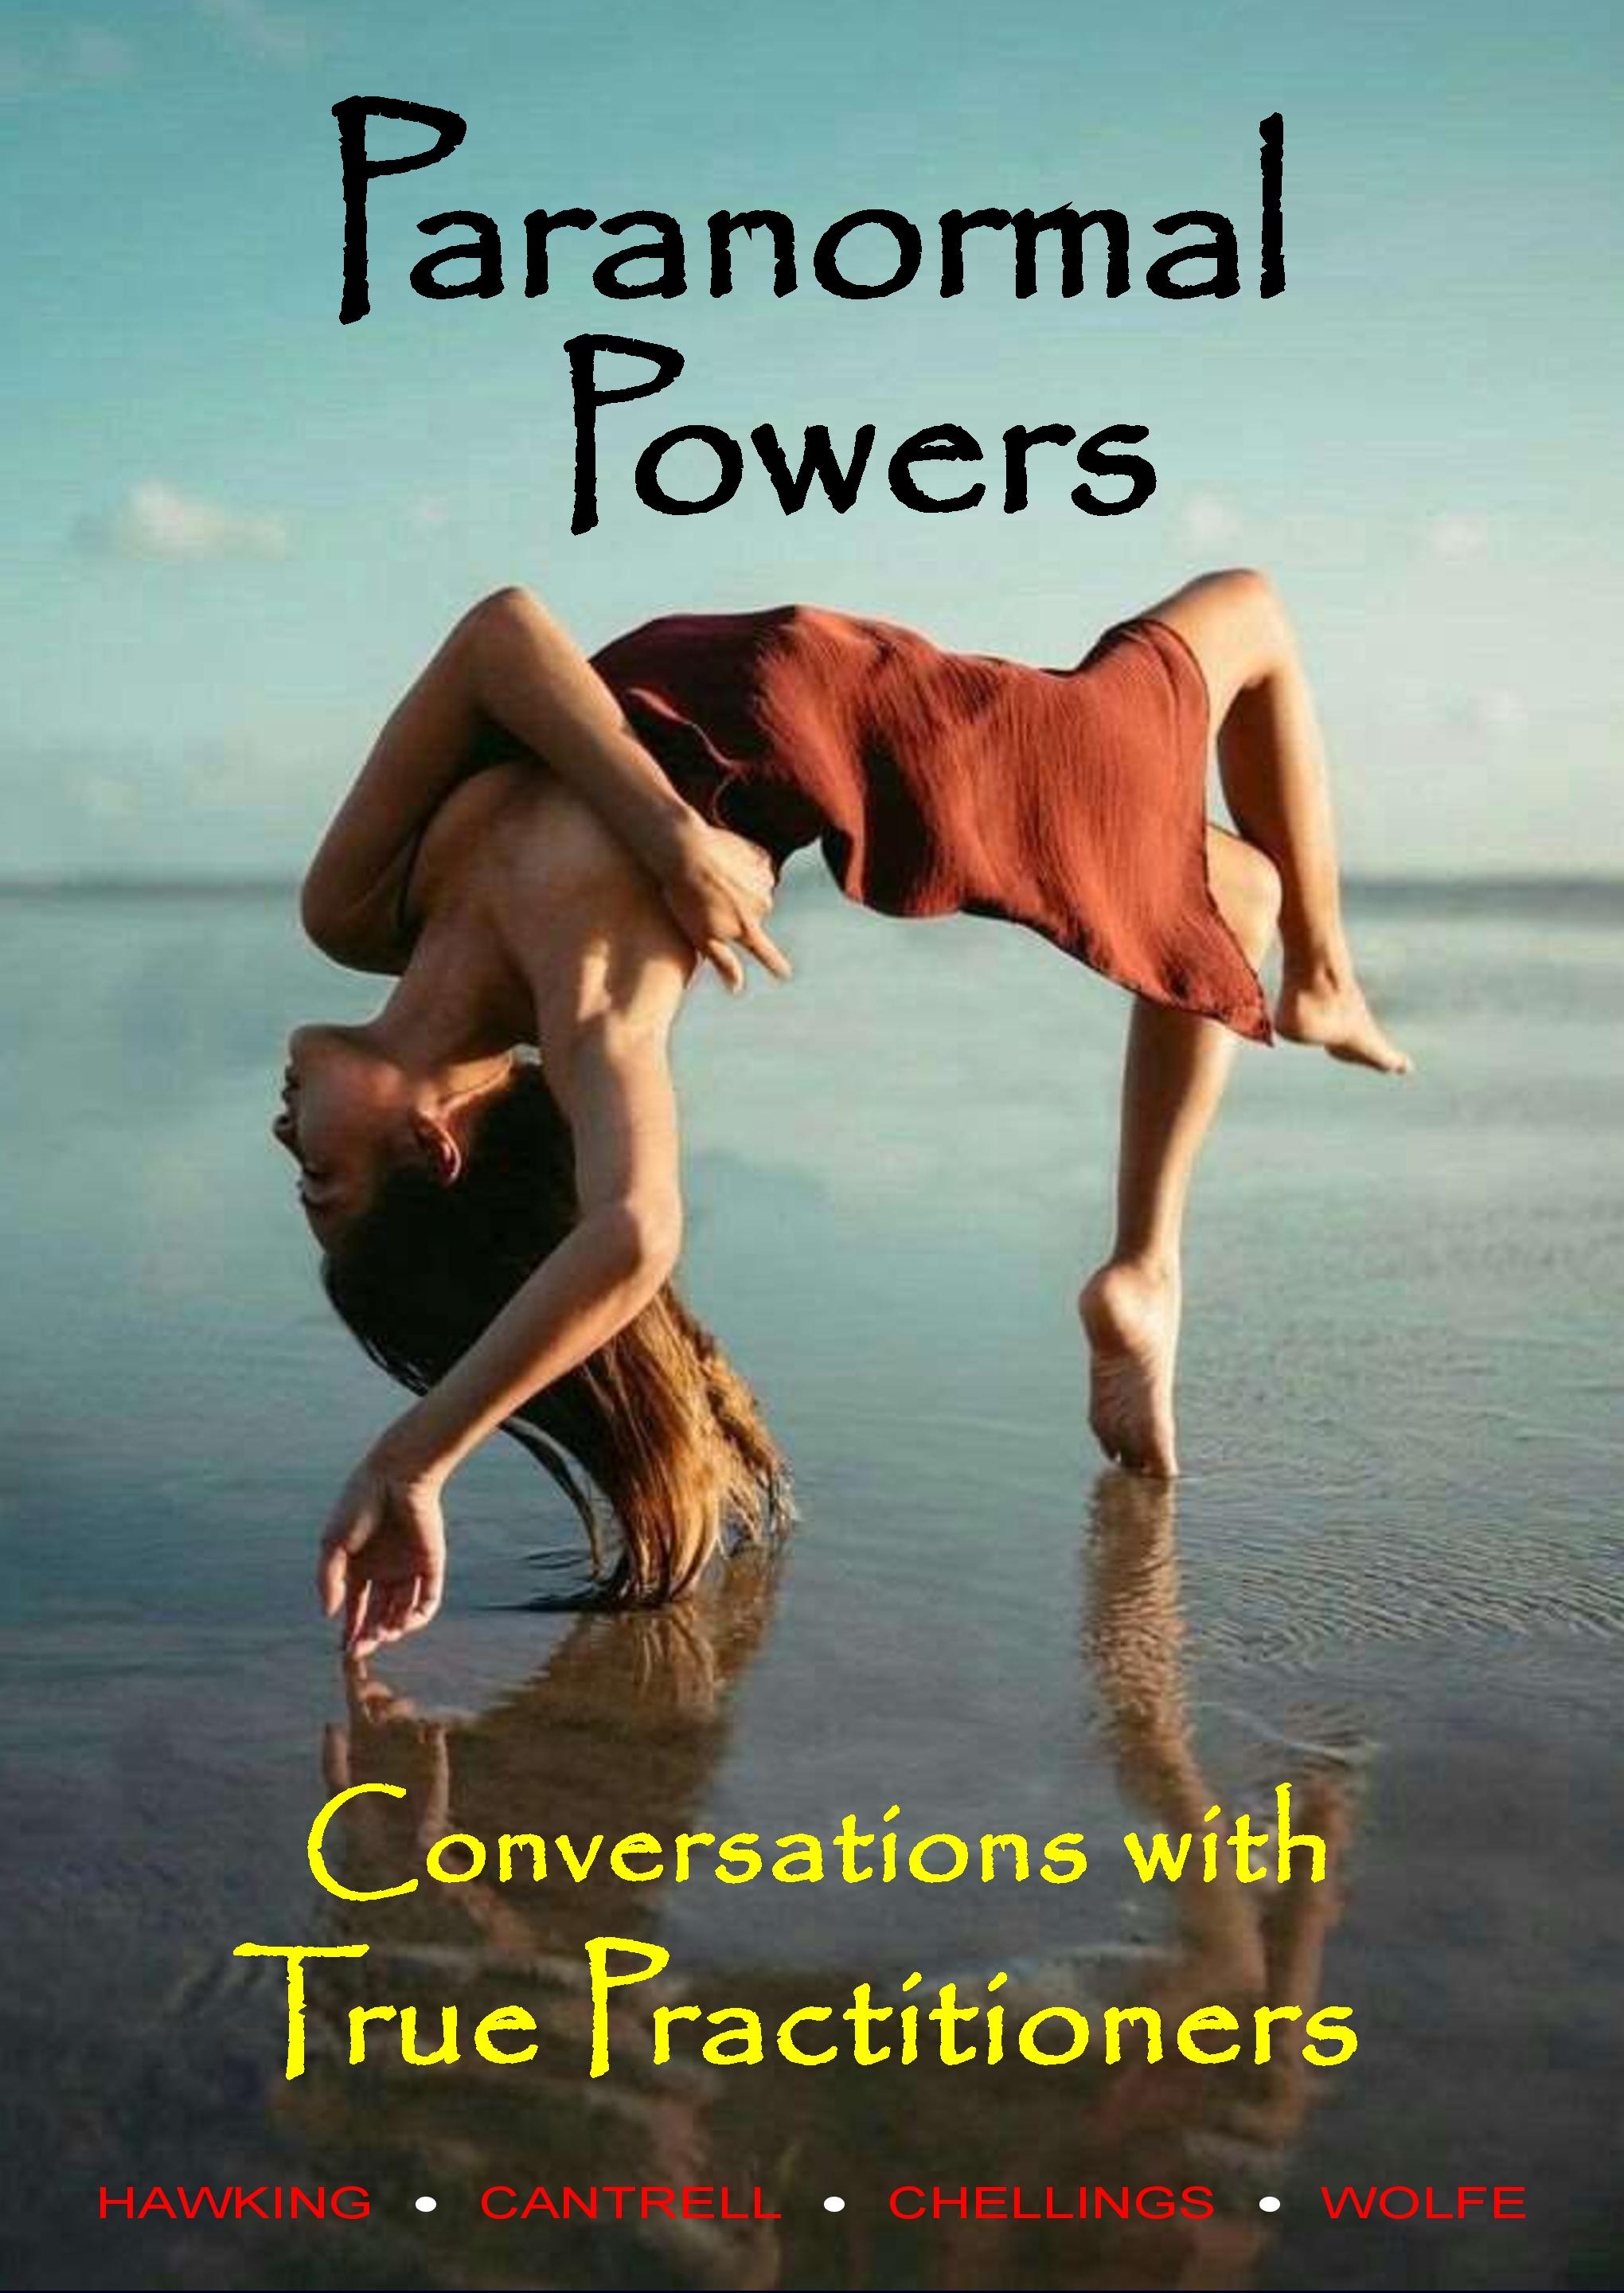 FREE: Paranormal Powers, Conversations with True Practitioners by M.G. Hawking, H. Cantrell, A. Chellings, J. Wolfe